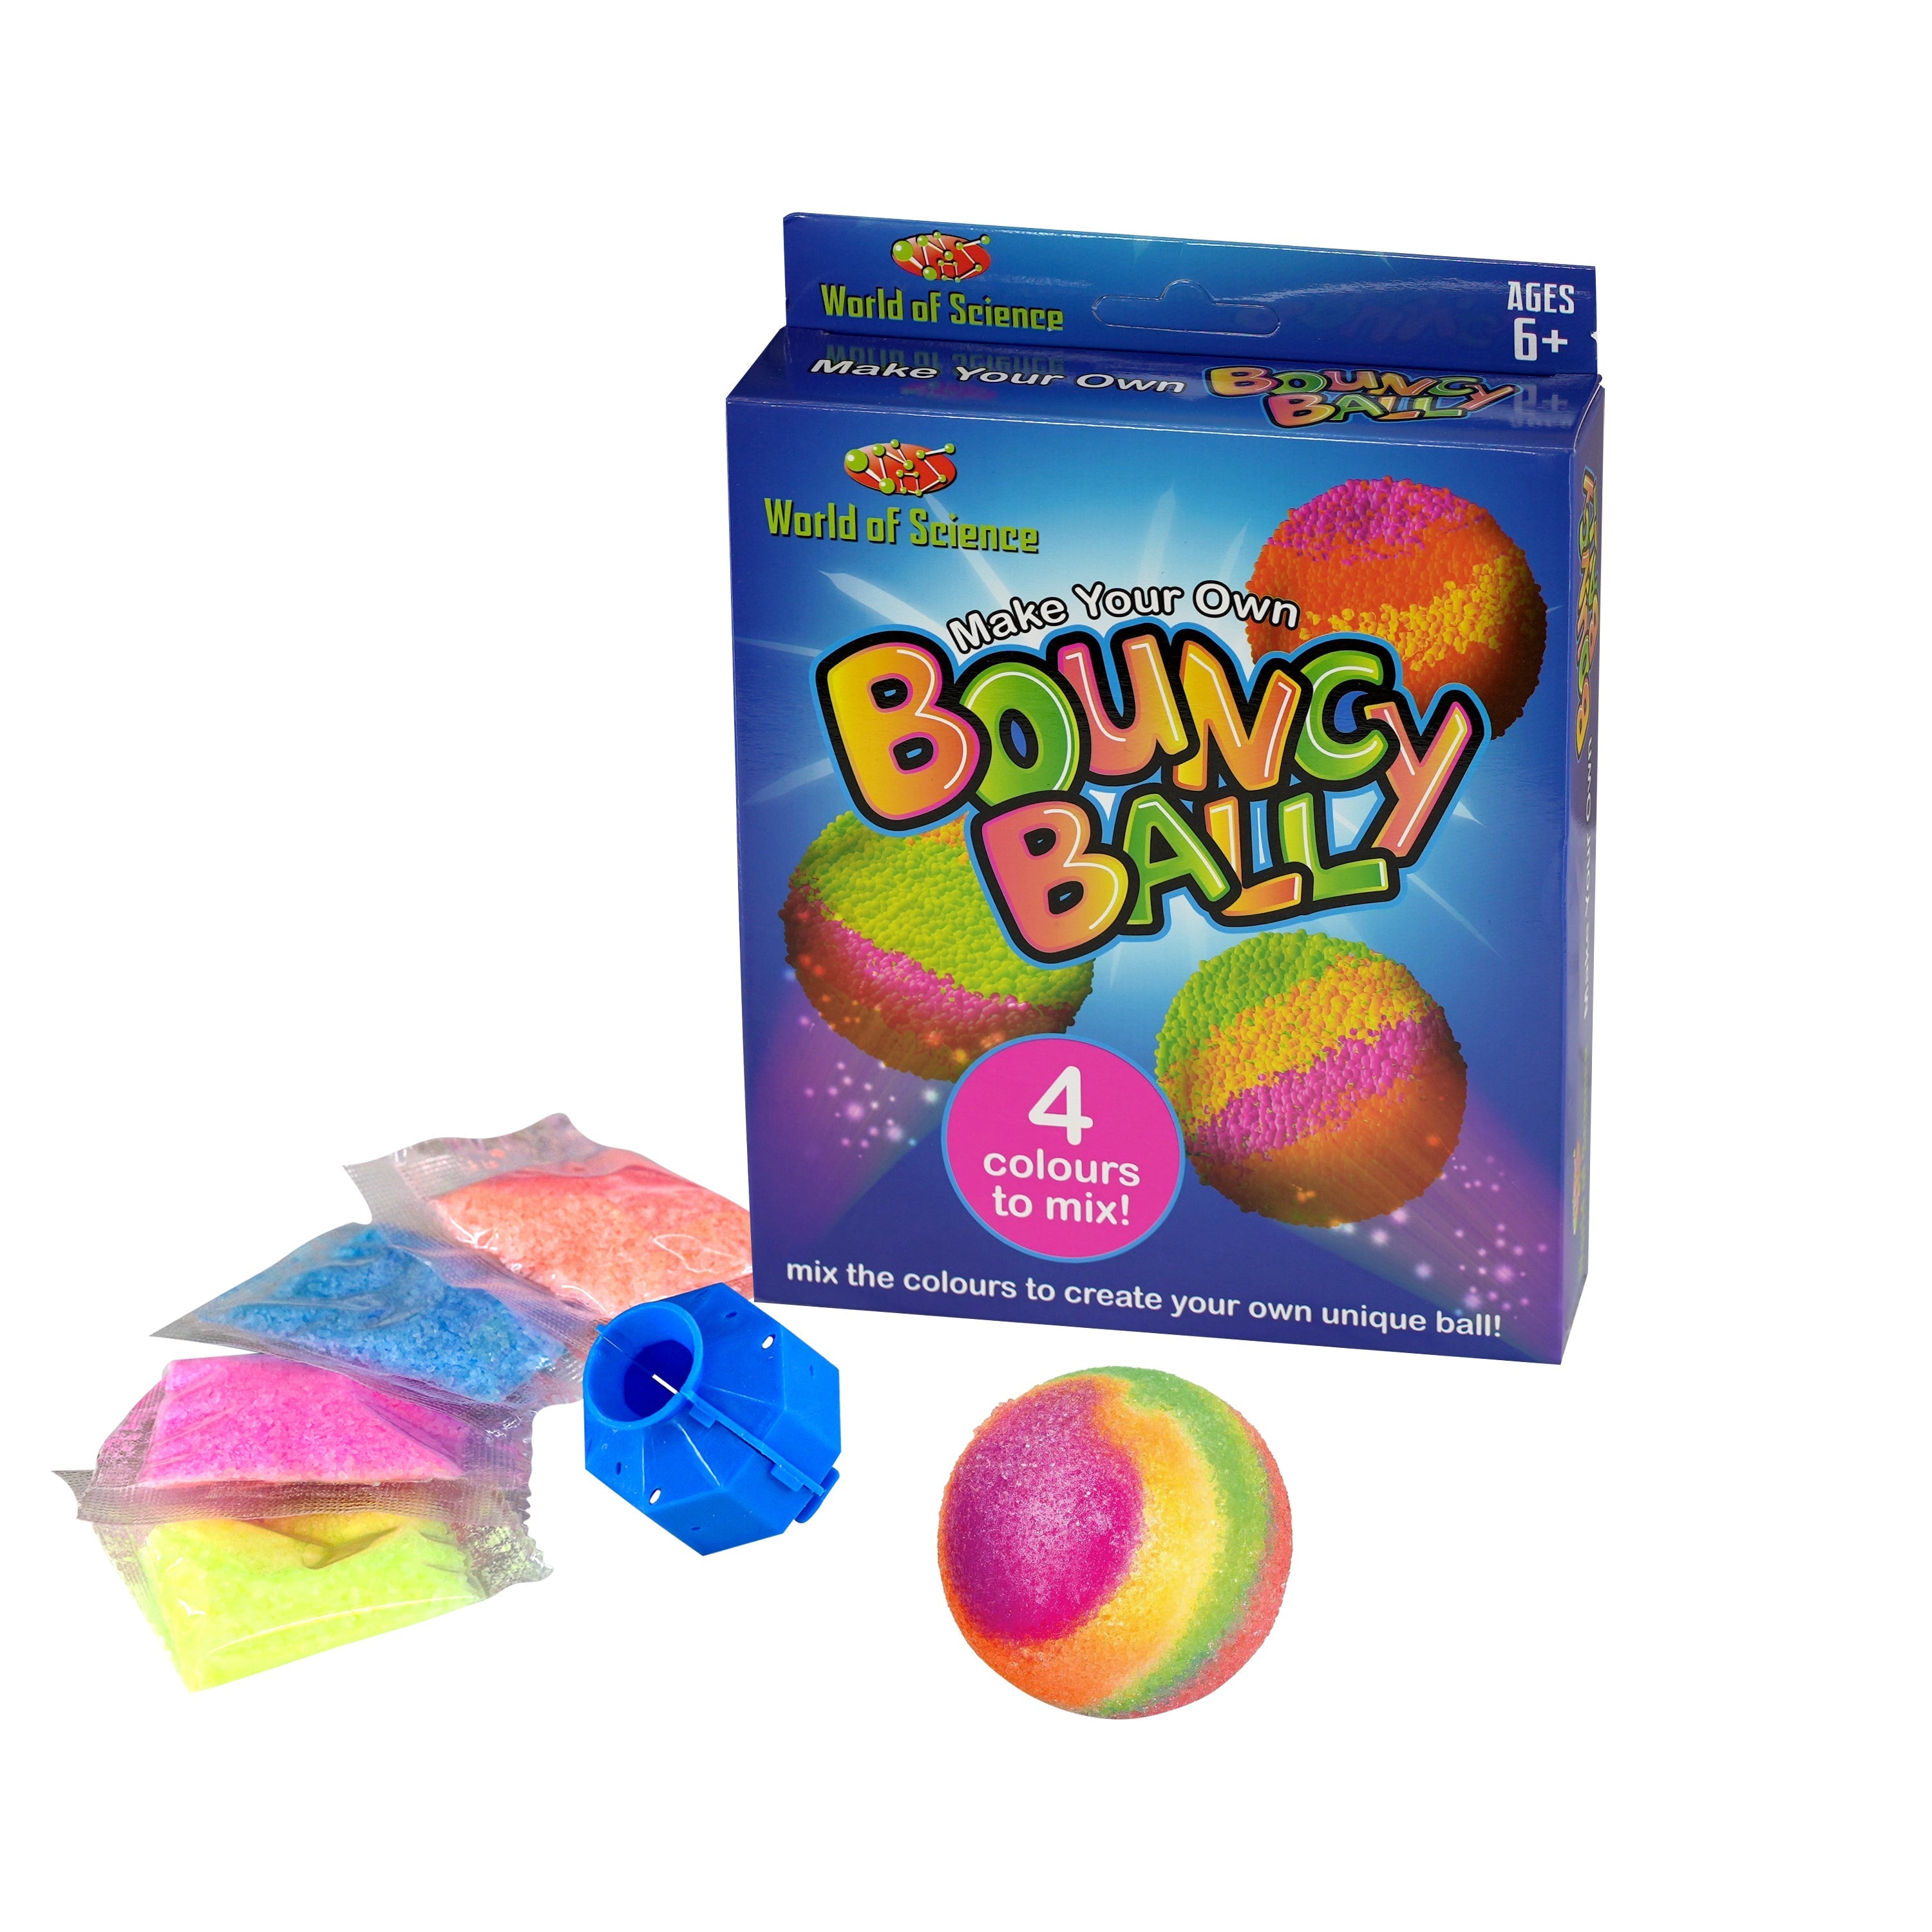 Make Your Own Bouncy Ball Kids Art Craft Set The Magic Toy Shop - The Magic Toy Shop